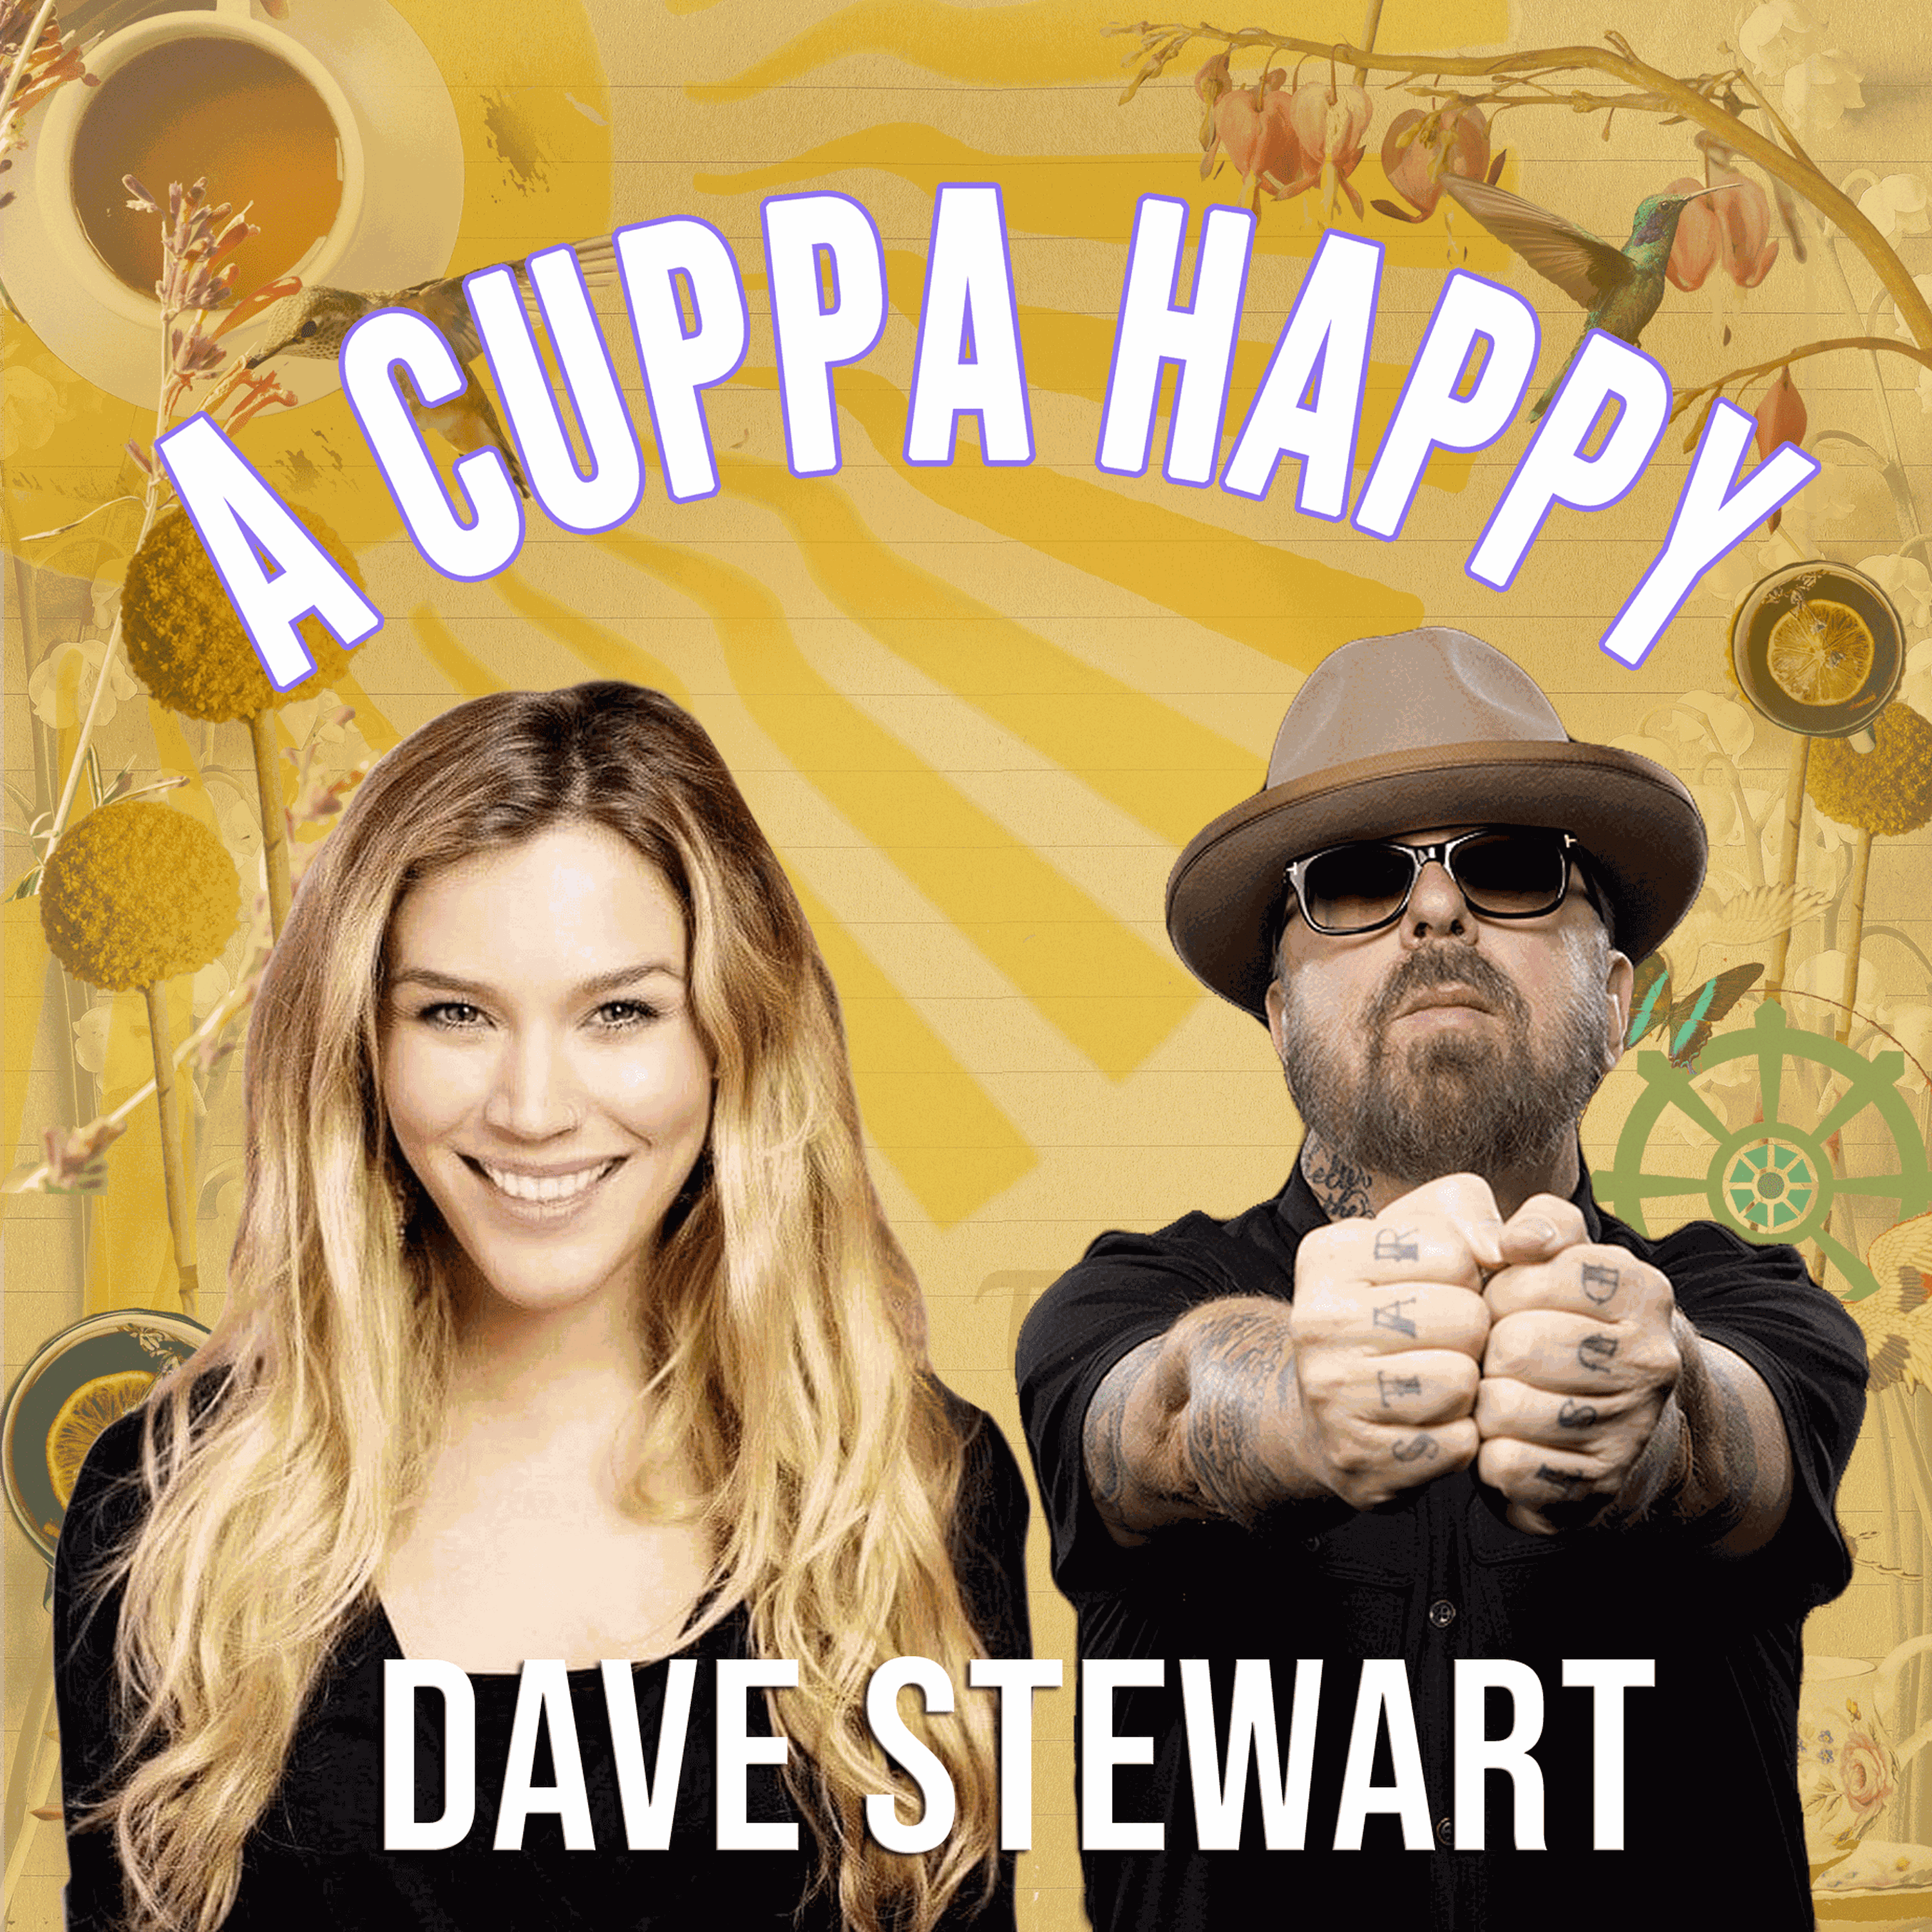 Dave Stewart - Creativity, happy accidents and failing forward